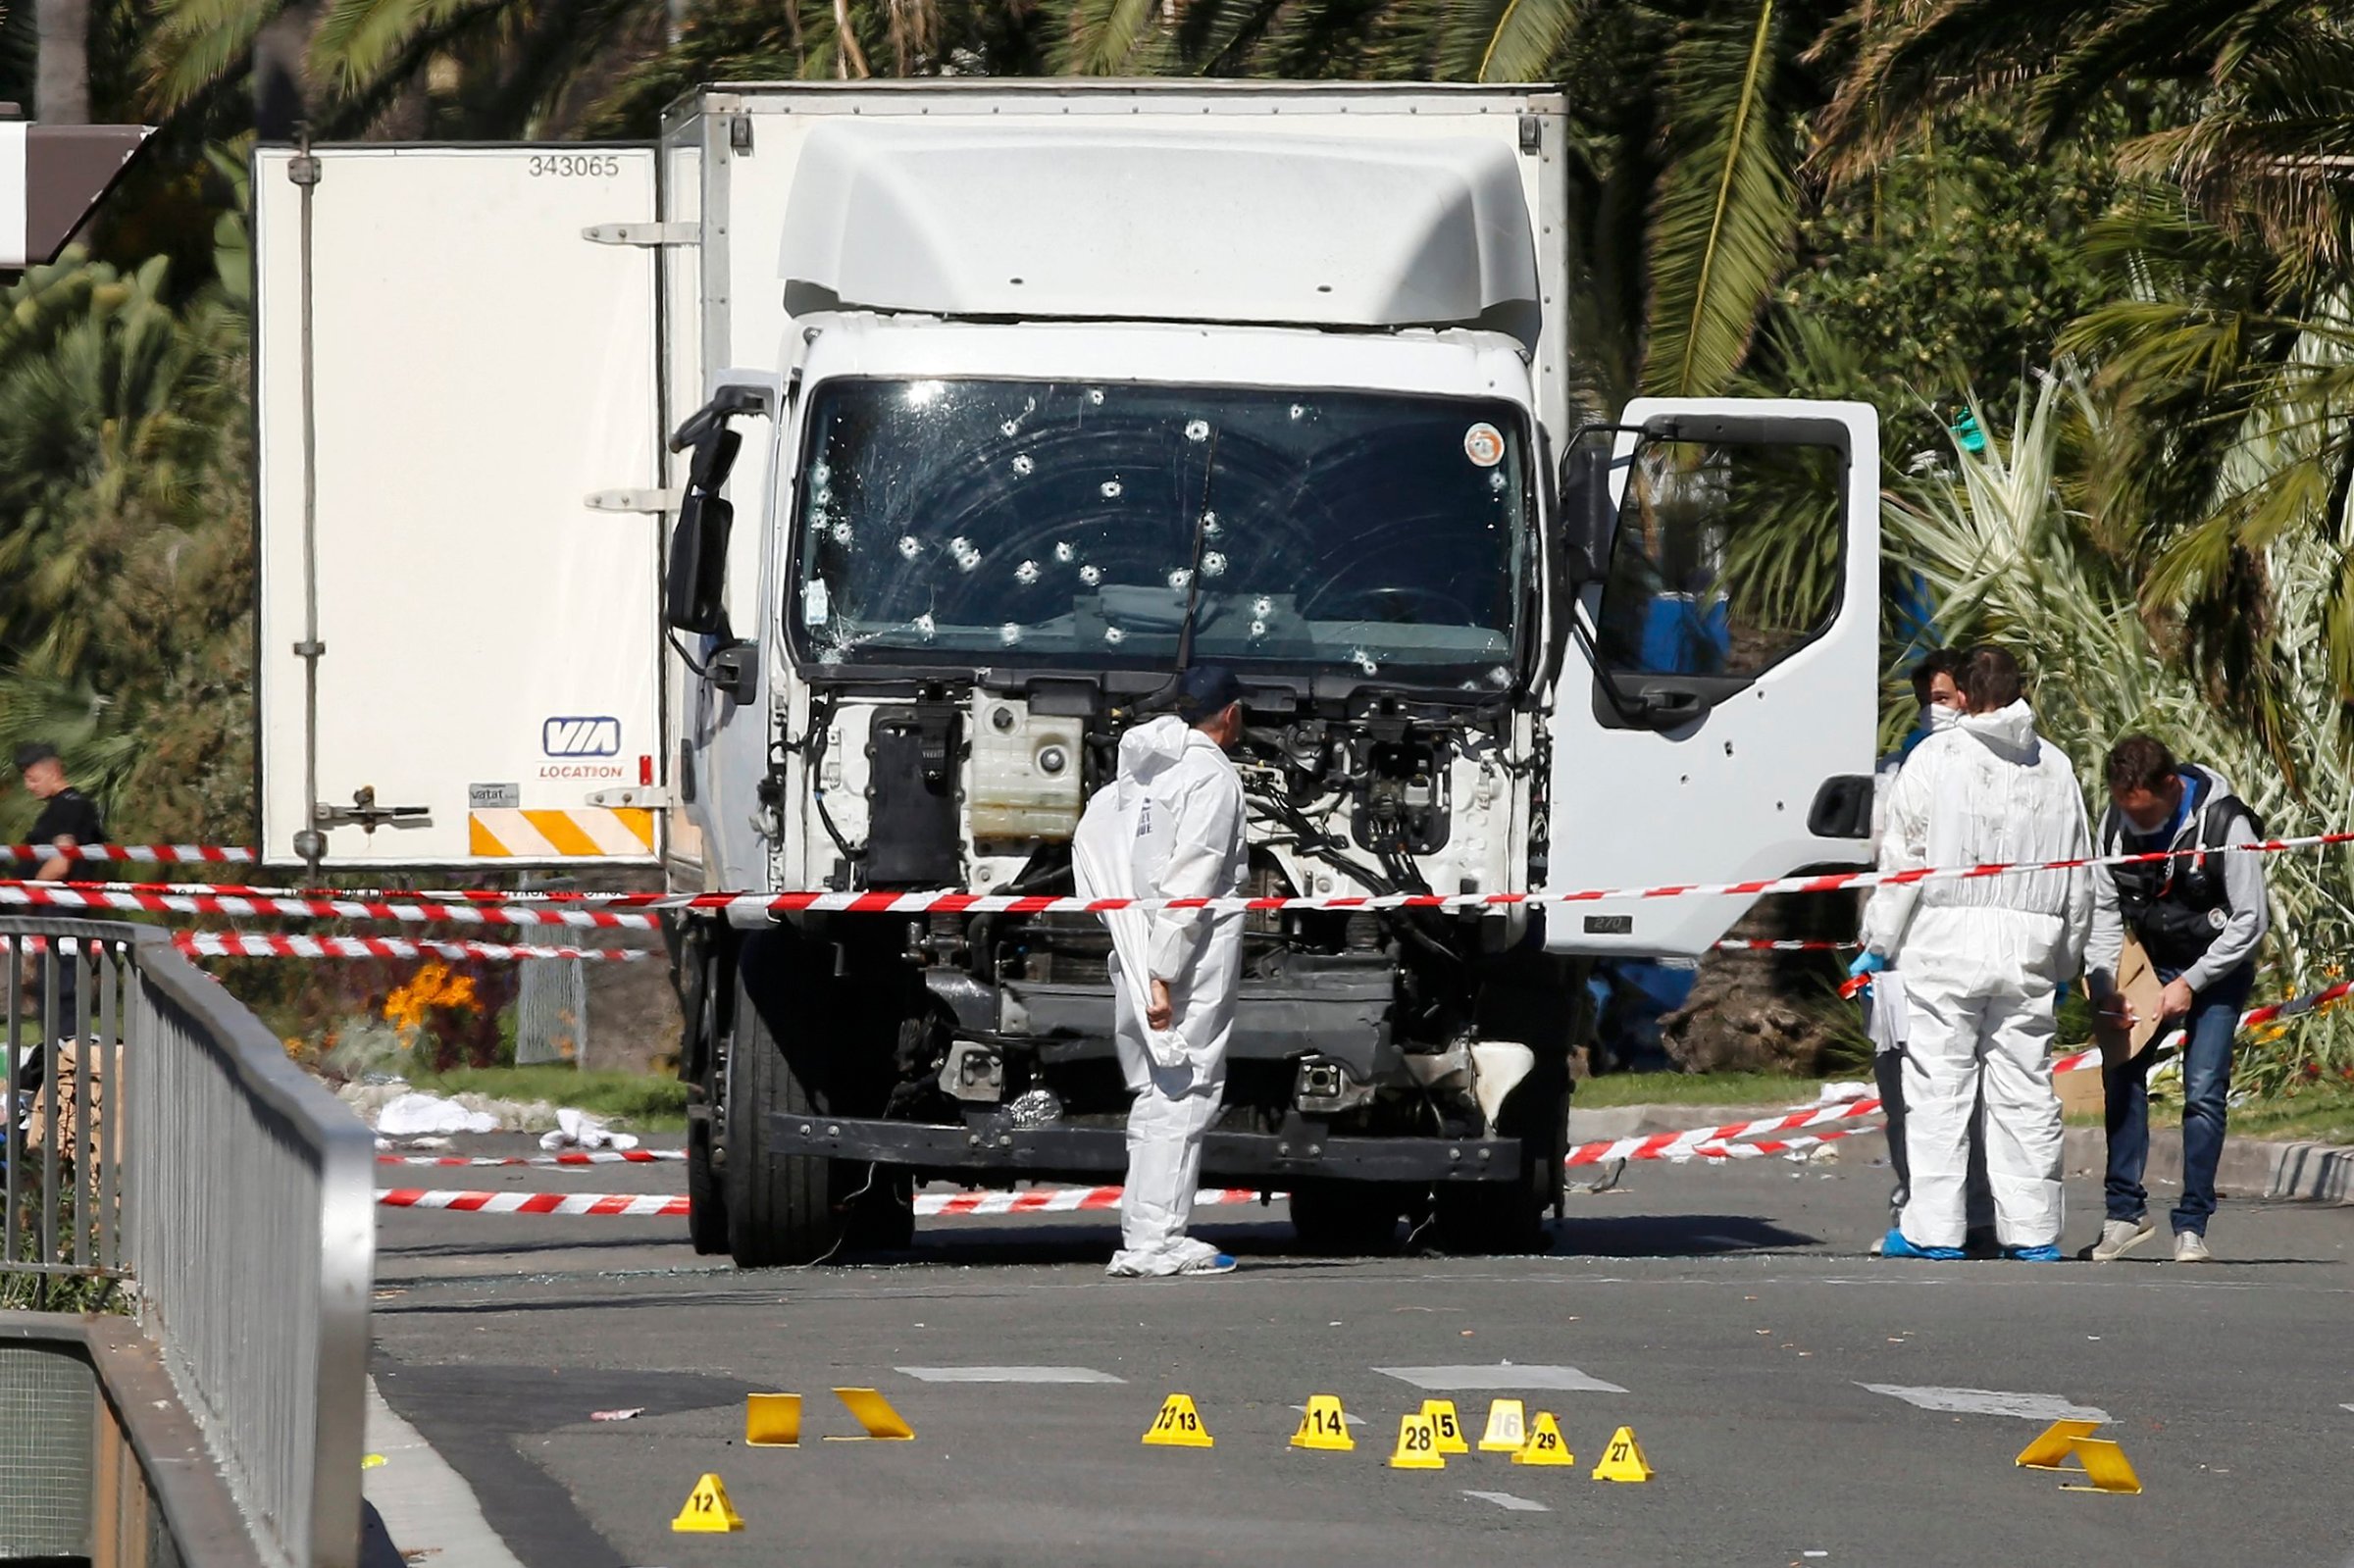 Investigators continue to work at the scene near the truck that was driven into a crowd at high speed, killing scores who were celebrating Bastille Day on July 14, on the Promenade des Anglais in Nice, France, on July 15, 2016.